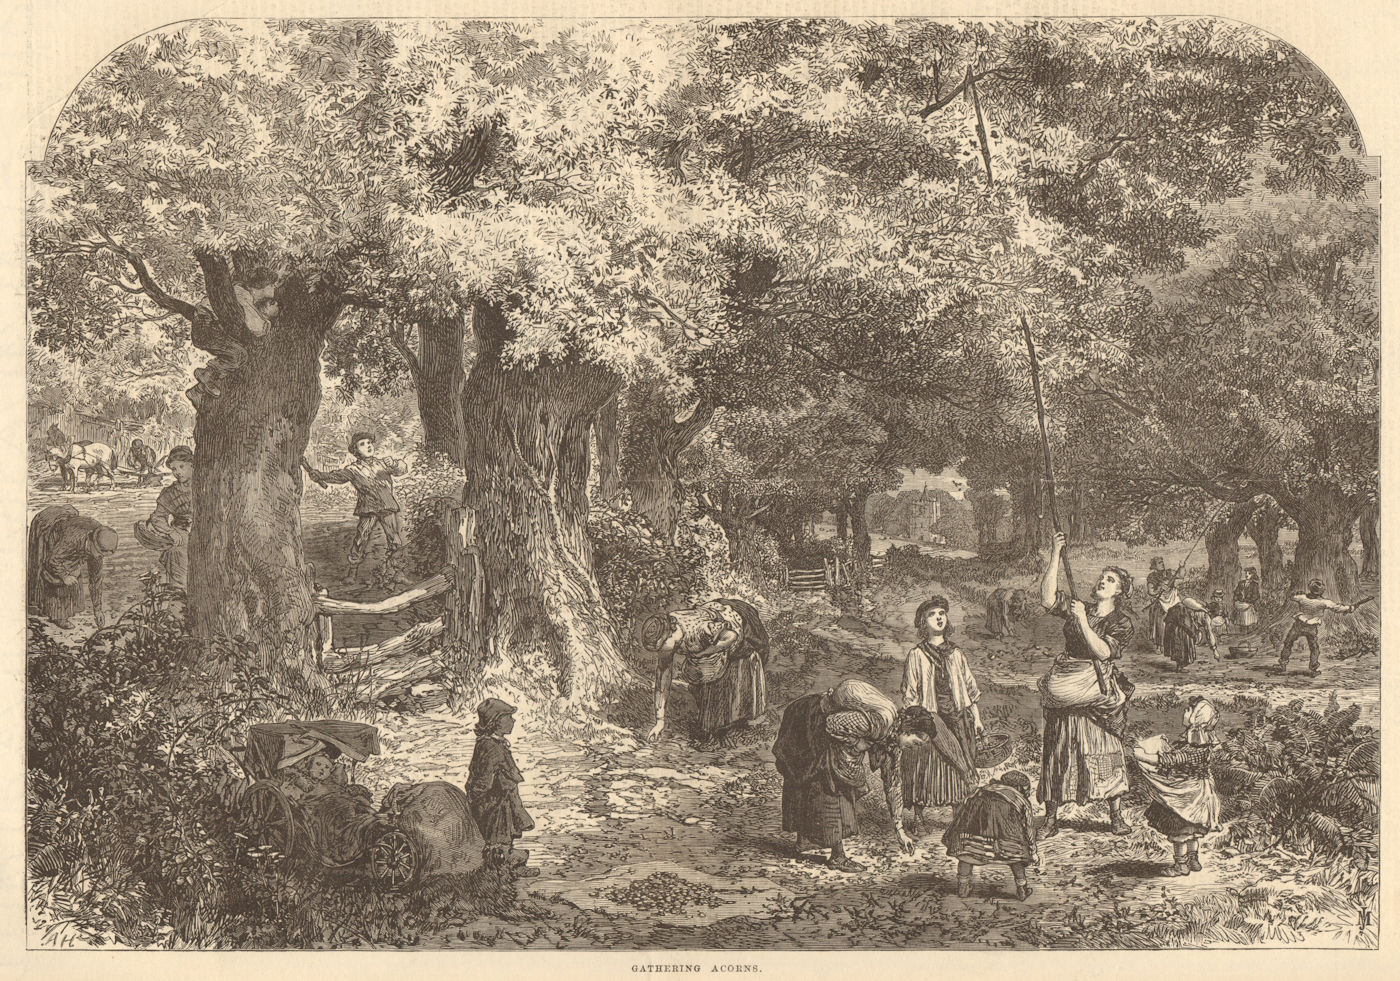 Associate Product Gathering acorns. Farming. Family 1868 antique ILN full page print